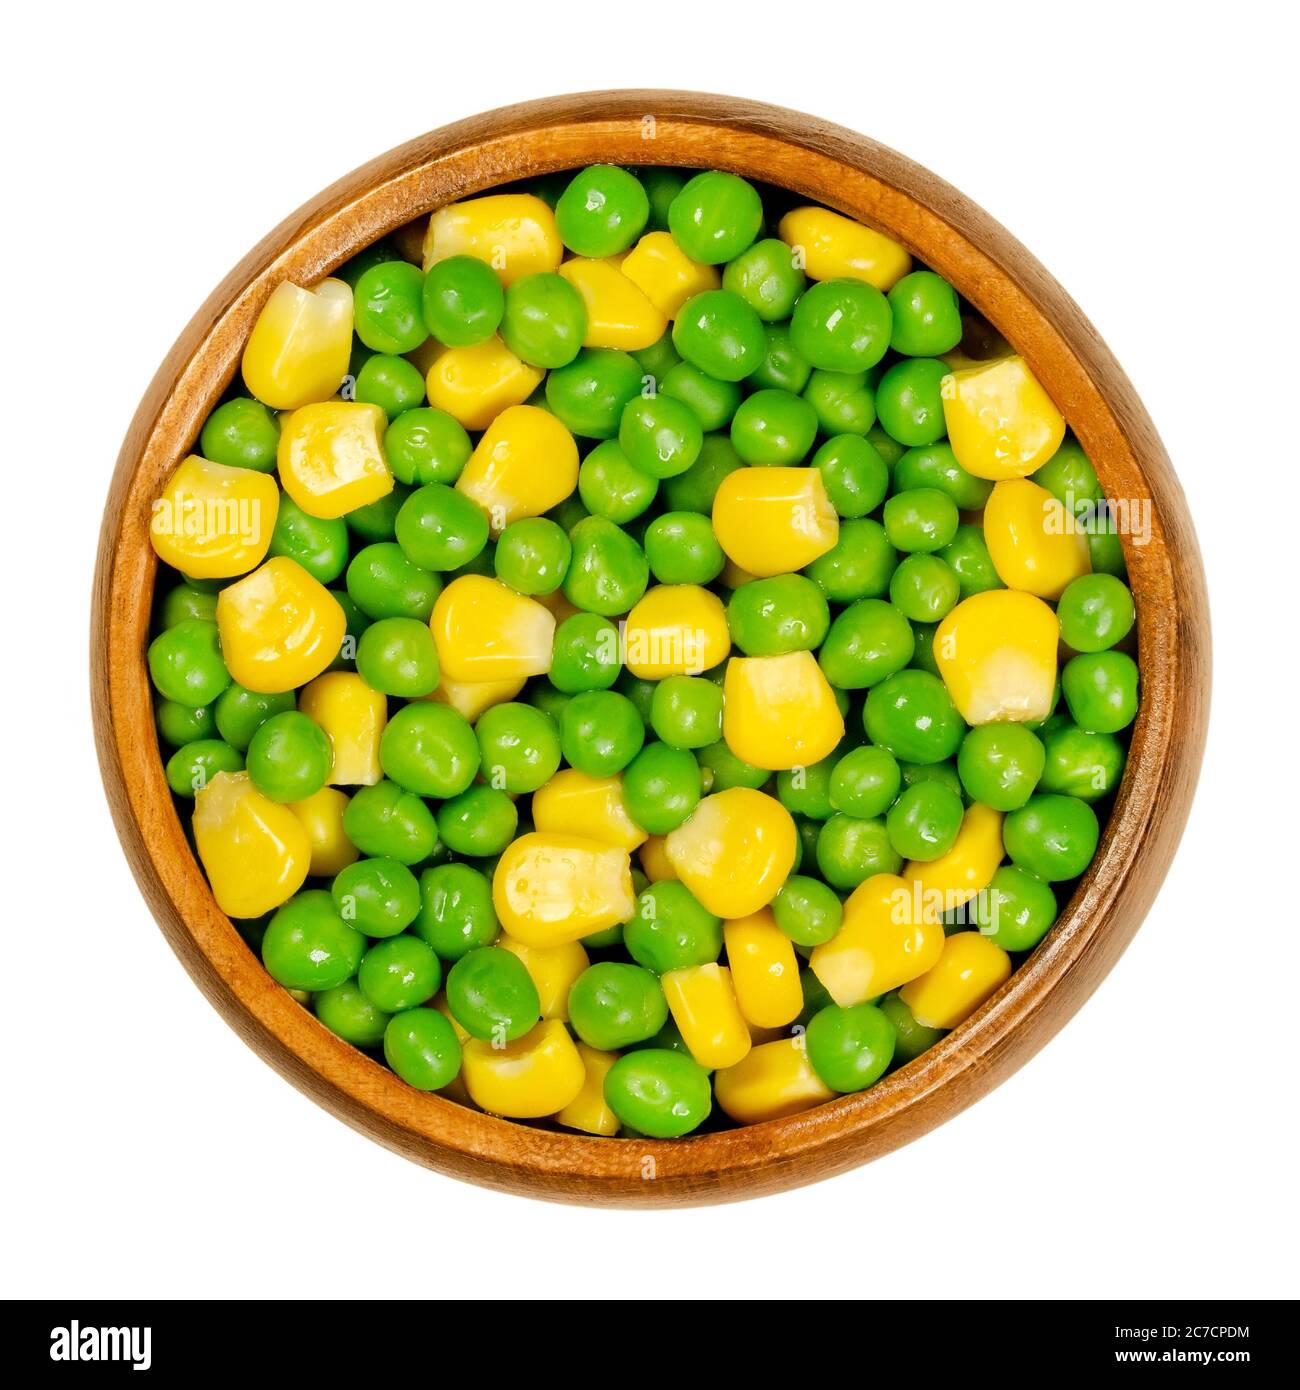 Green peas and corn in wooden bowl. Mixed vegetables. Seeds of pod fruit Pisum sativum and blanched yellow vegetable maize, Zea mays. Stock Photo